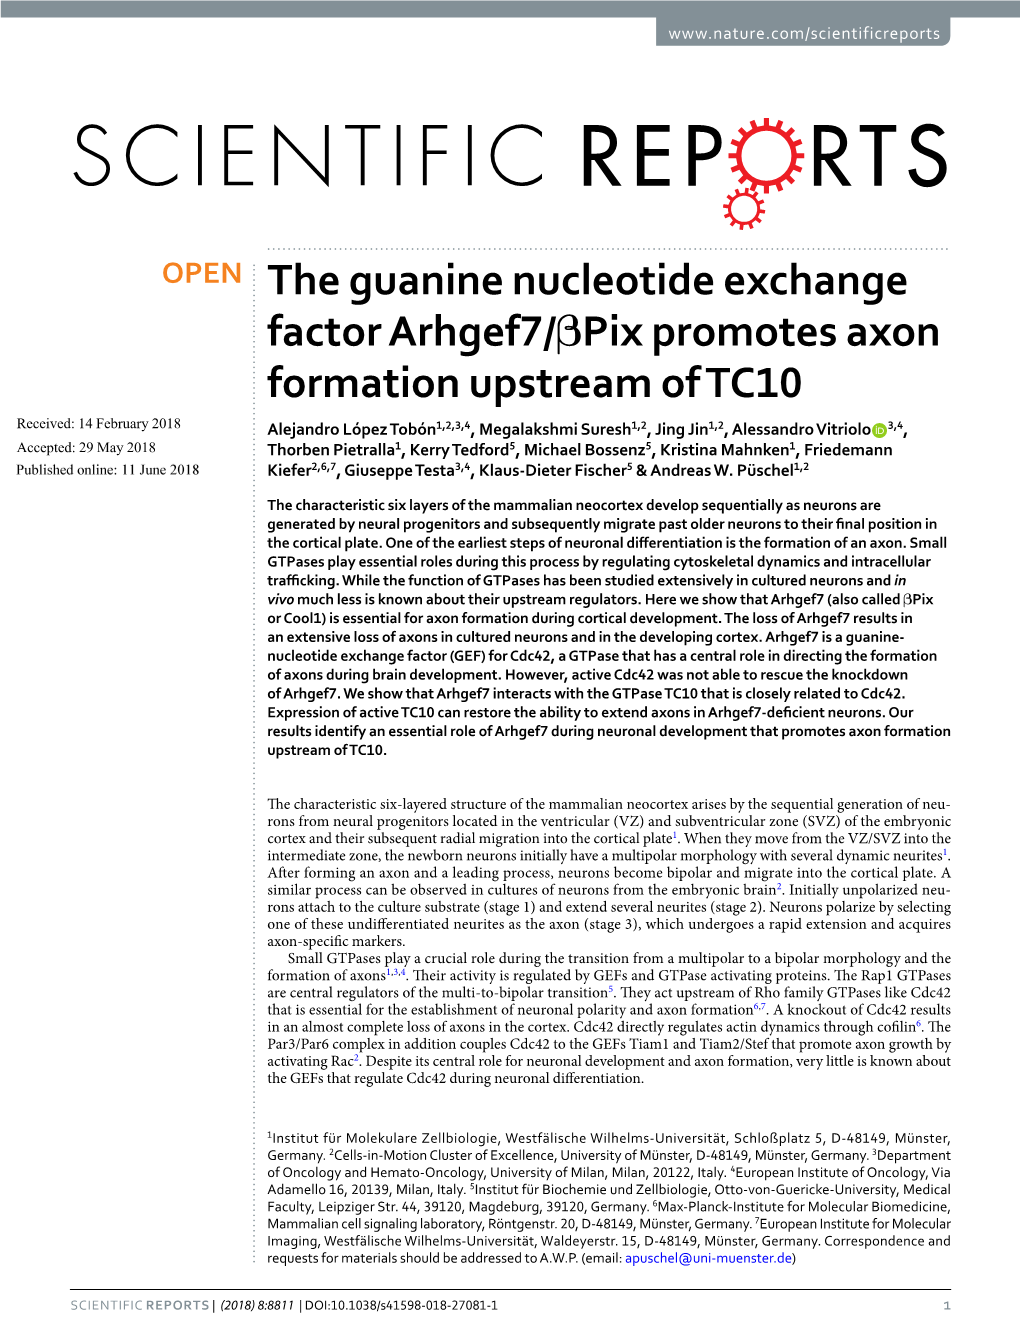 The Guanine Nucleotide Exchange Factor Arhgef7/Βpix Promotes Axon Formation Upstream of TC10